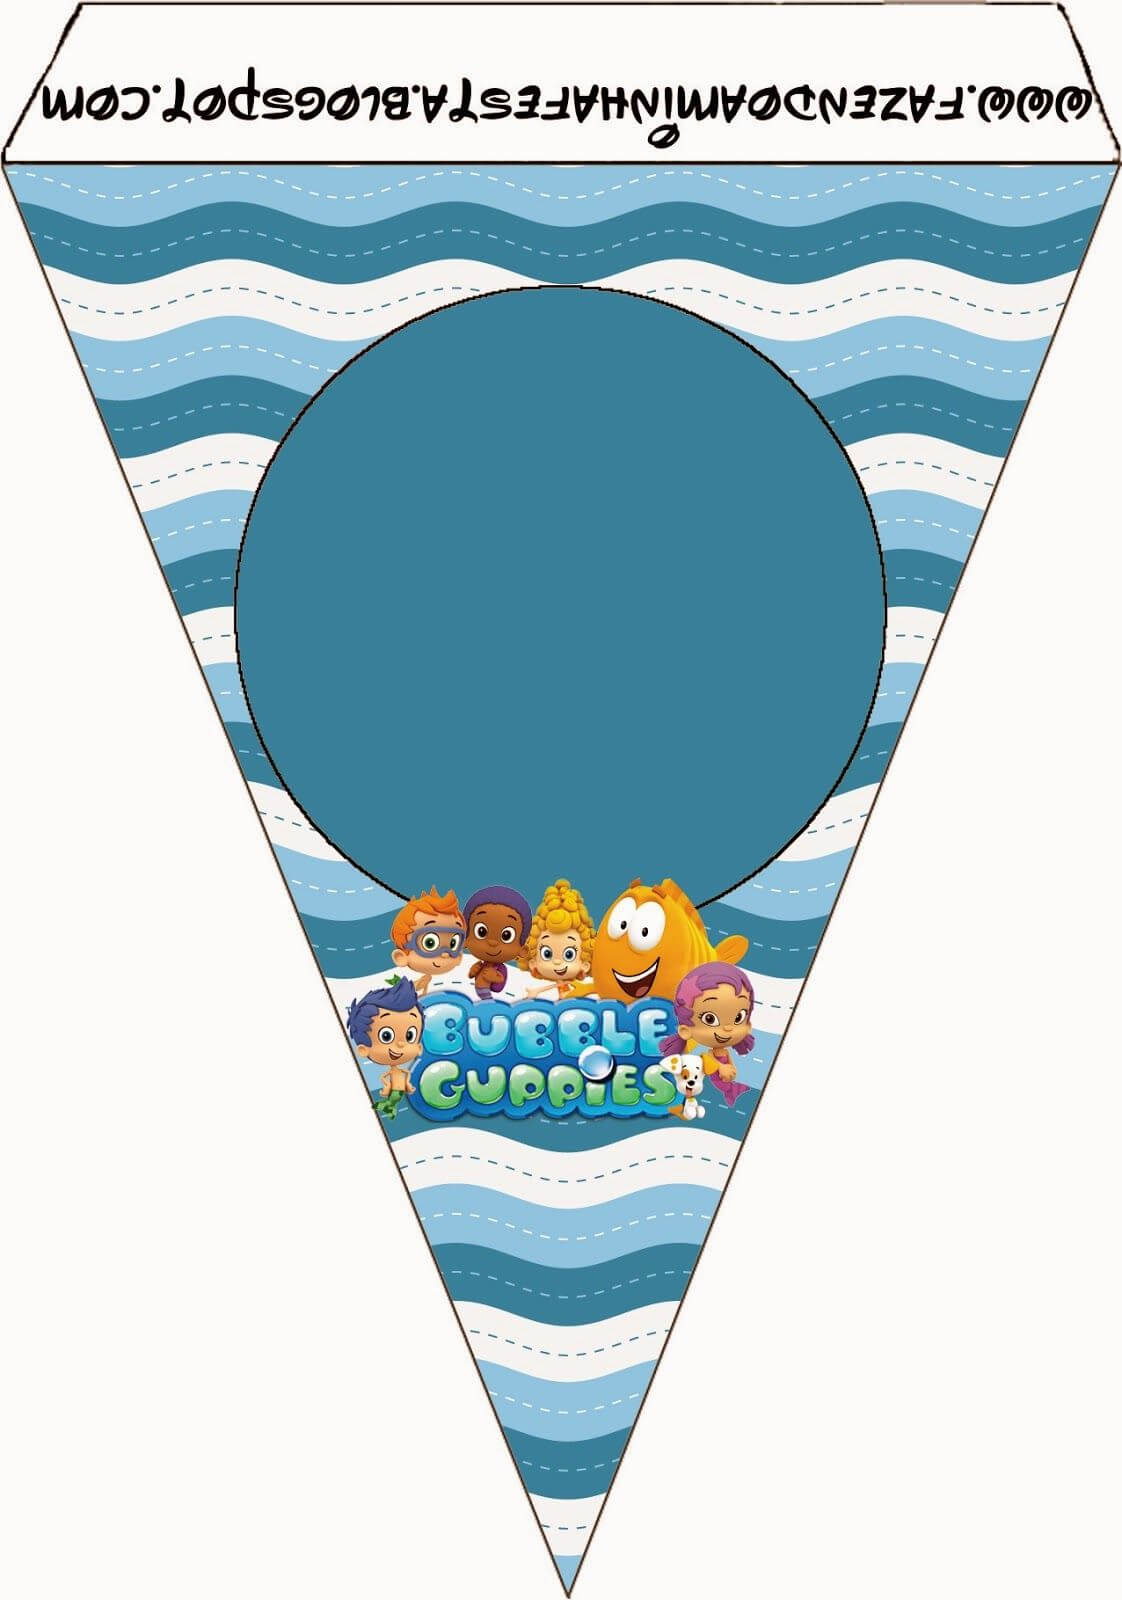 Bubble Guppies Free Party Printables. | Bubble Guppies Intended For Bubble Guppies Birthday Banner Template